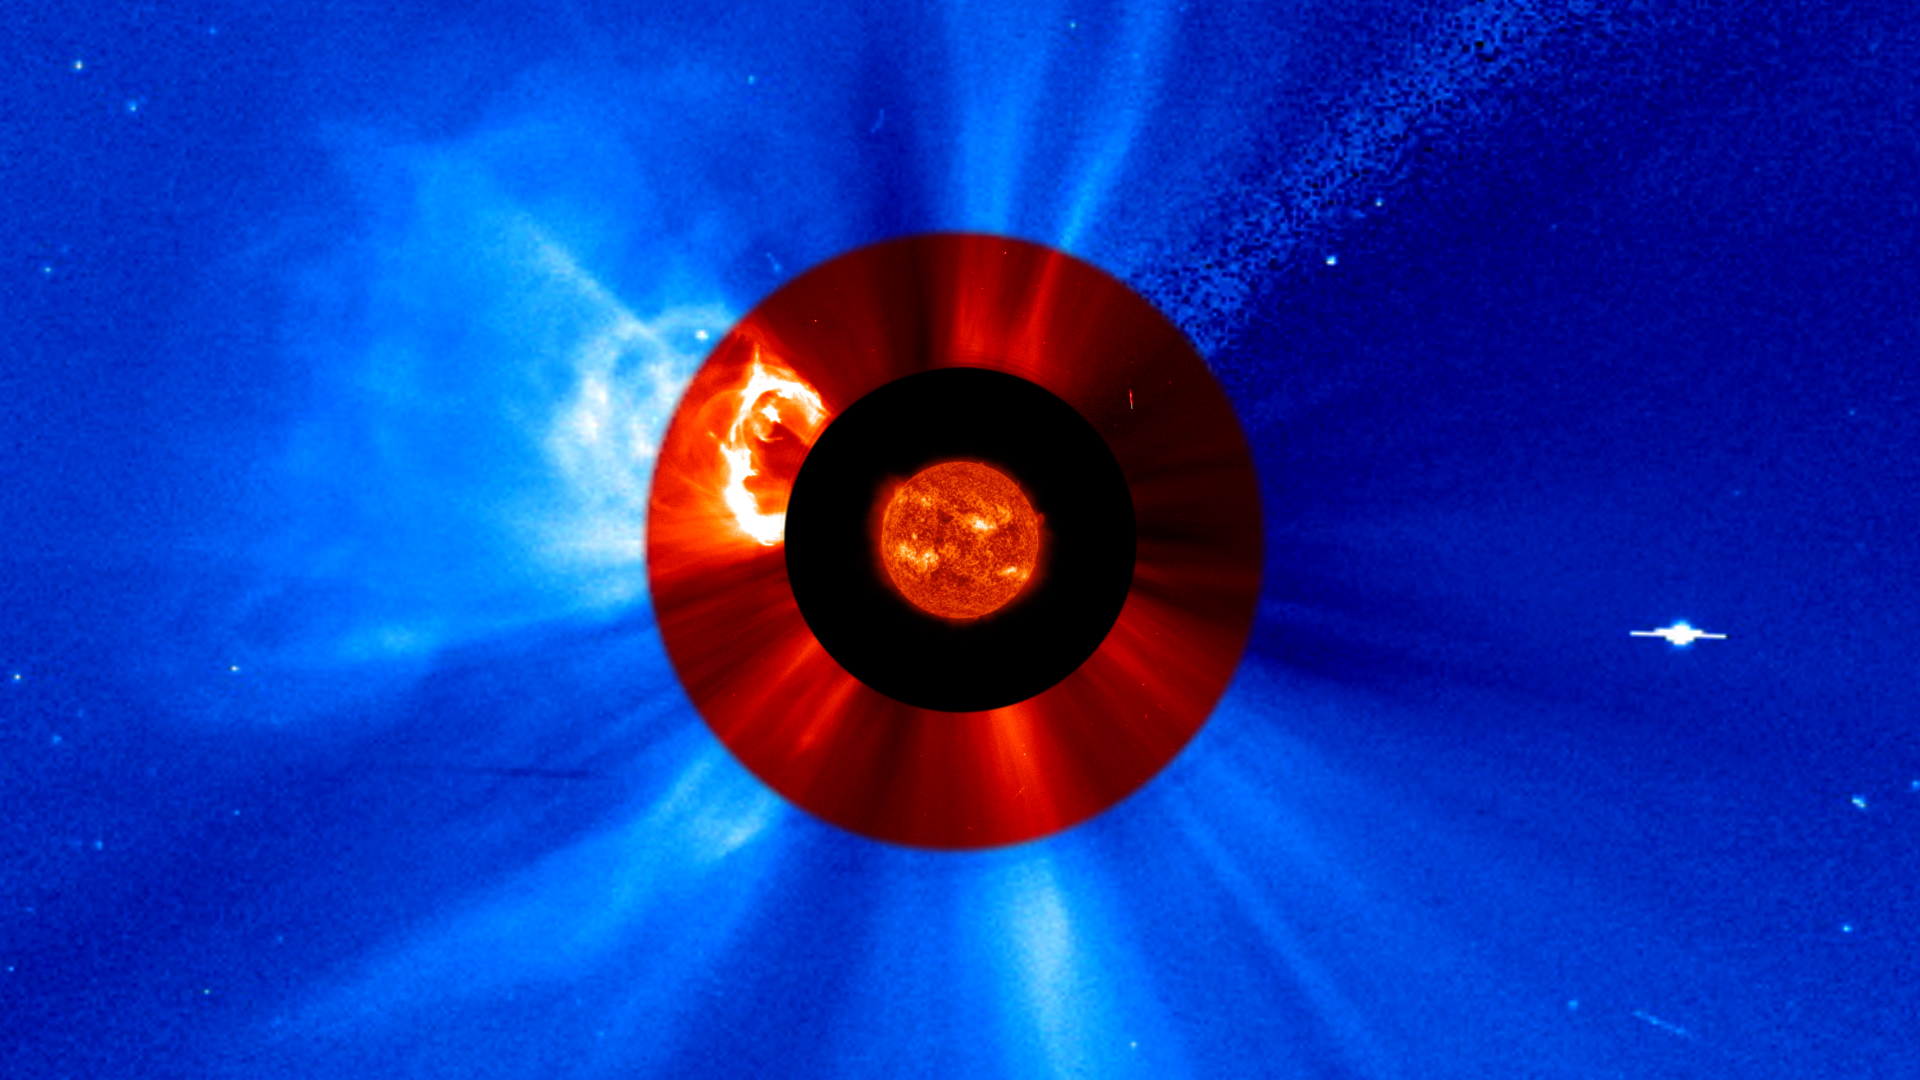 Several missions within NASA's Heliophysics System Observatory captured images of a gigantic eruption on the sun on May 1, 2013.  Working together,  such missions provide excellent coverage of a wide variety of solar events, a wealth of scientific data—and lots of beautiful imagery.For complete transcript, click here.